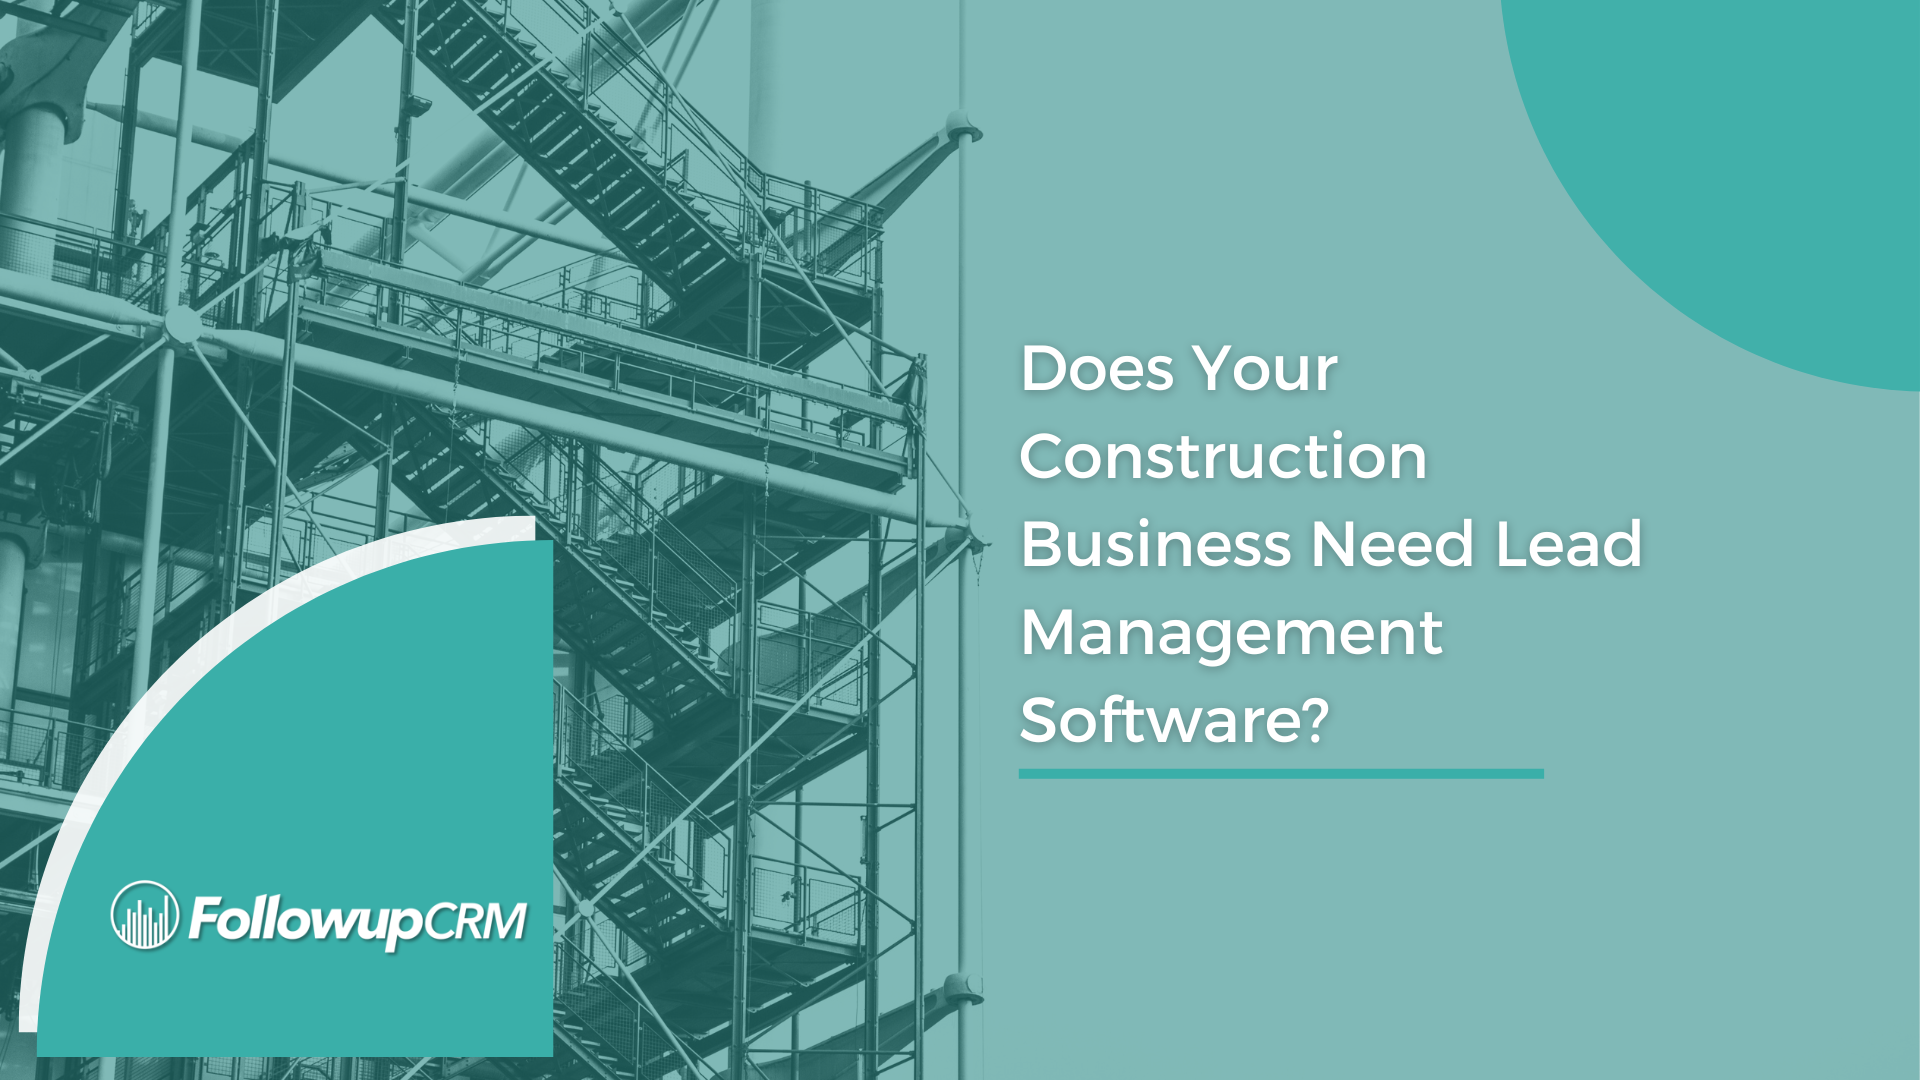 Does Your Construction Business Need Lead Management Software?